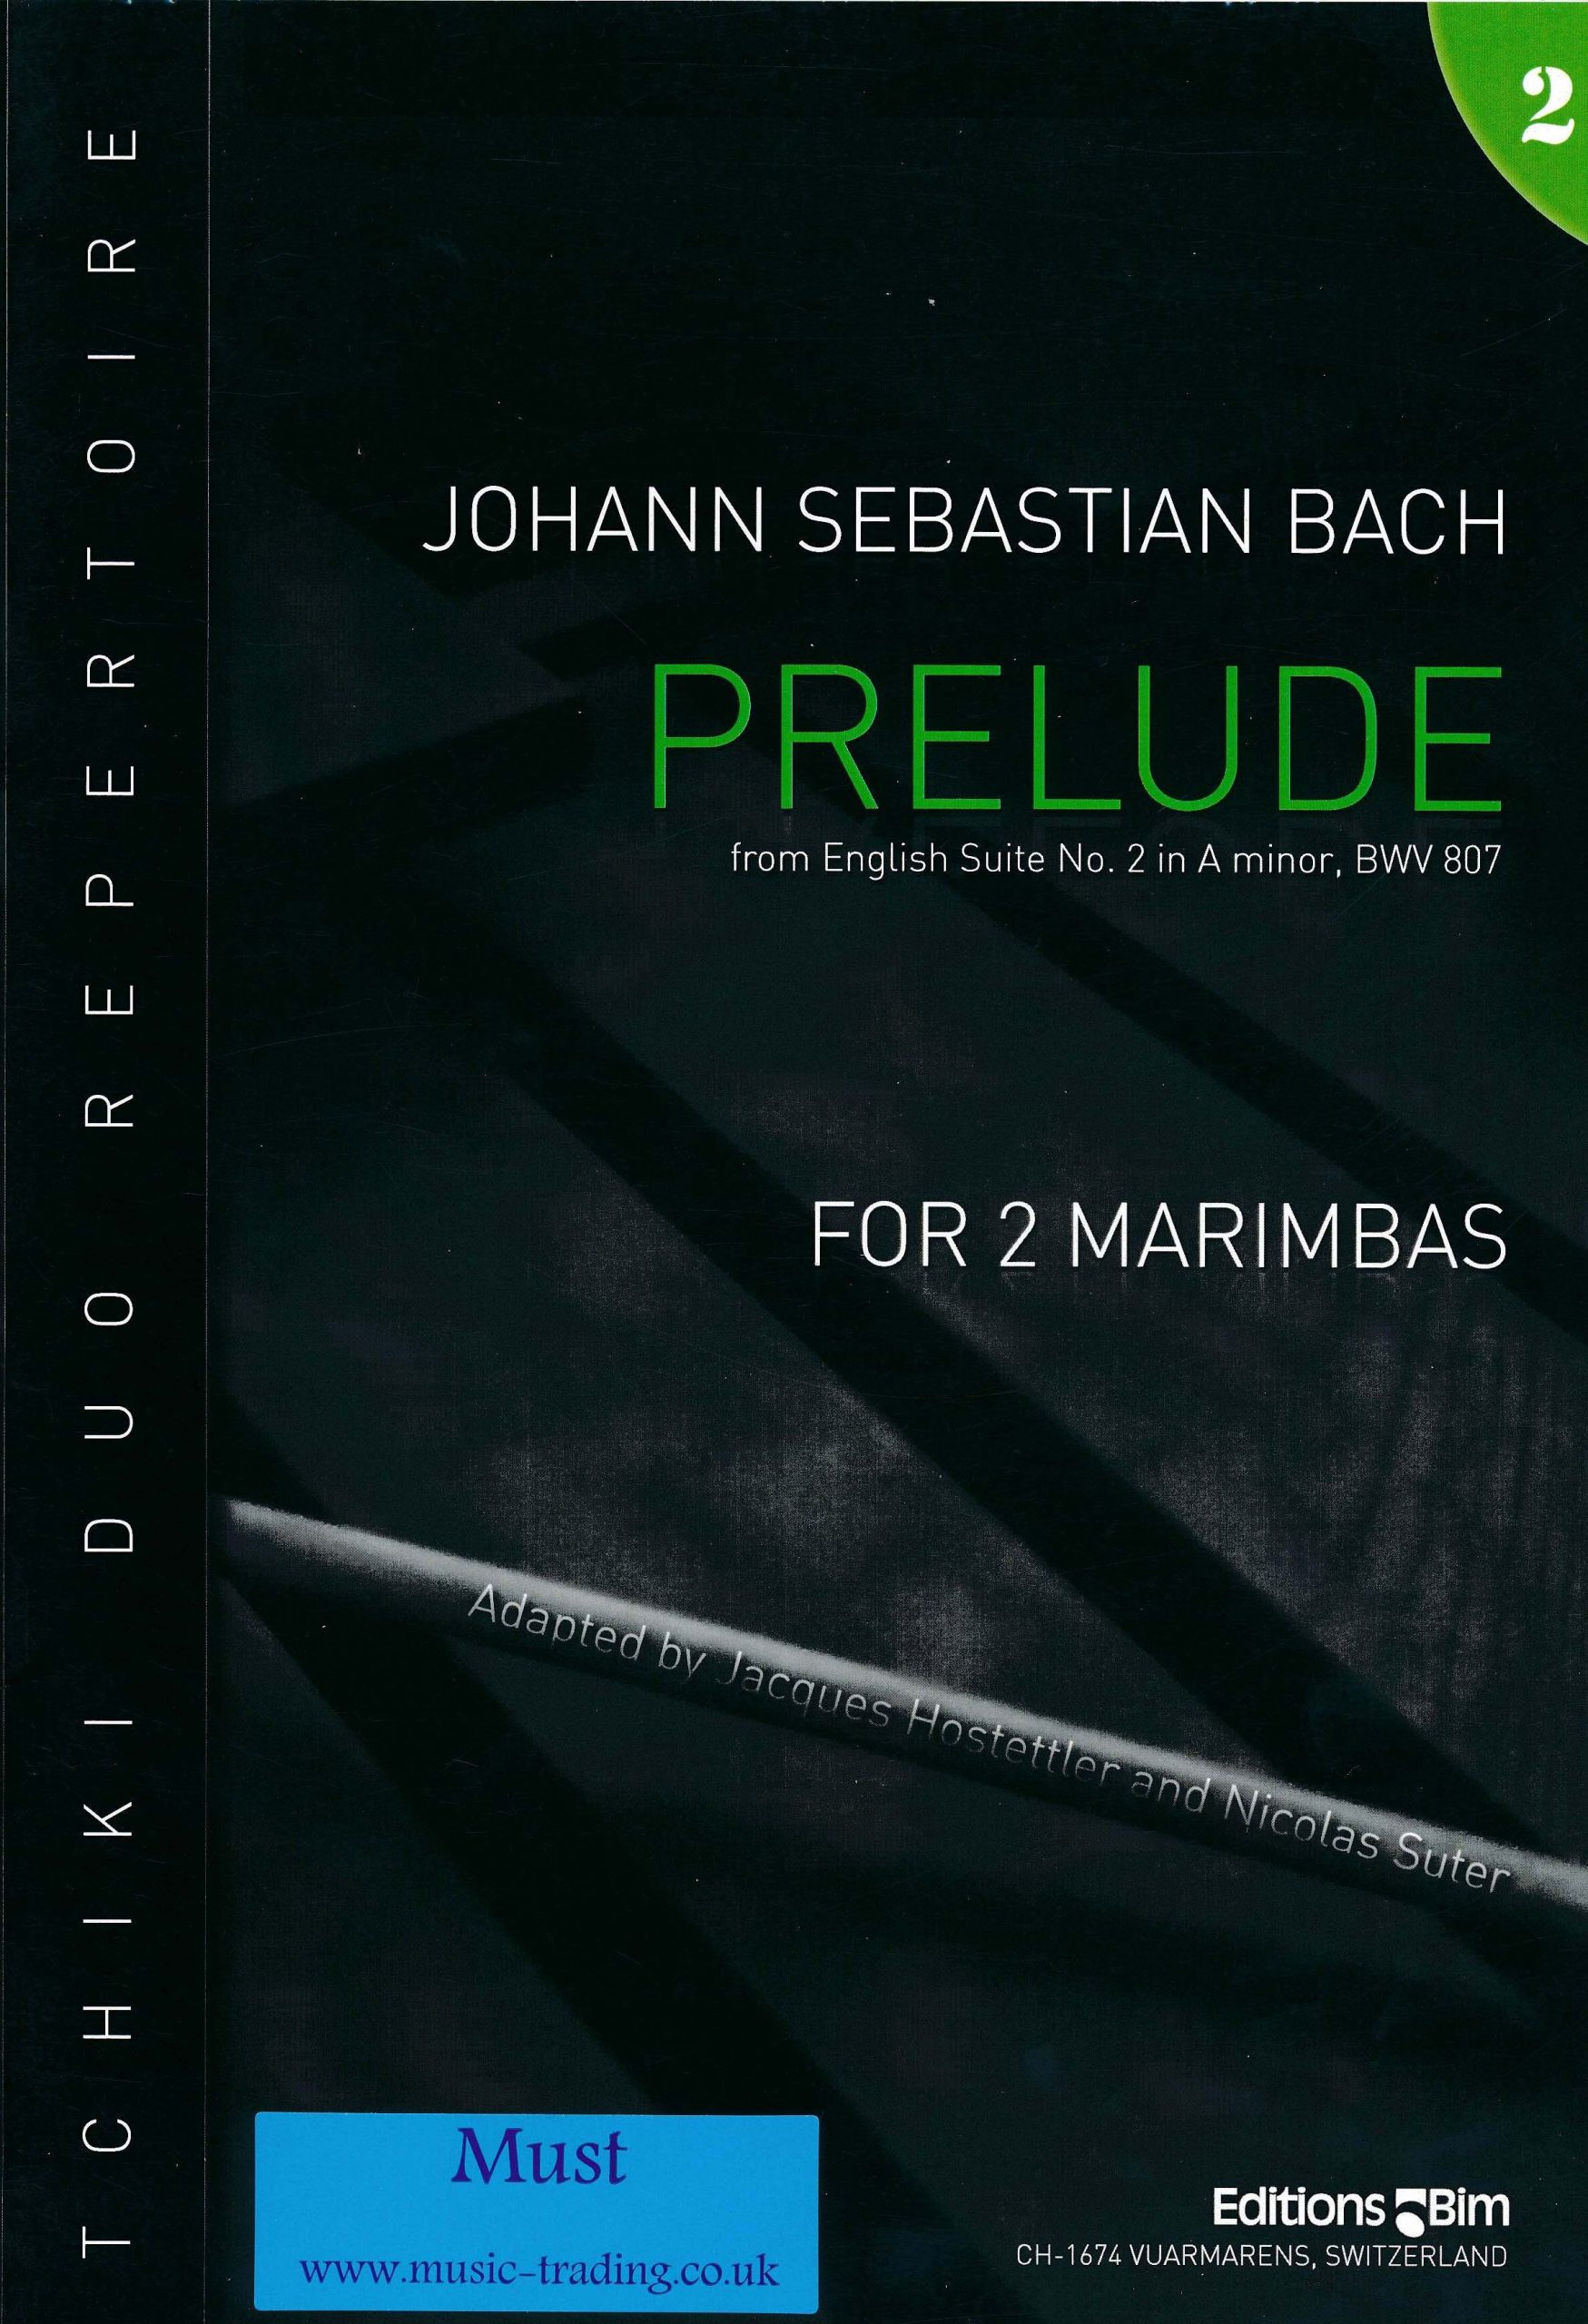 Prelude from English Suite no. 2 in A Minor